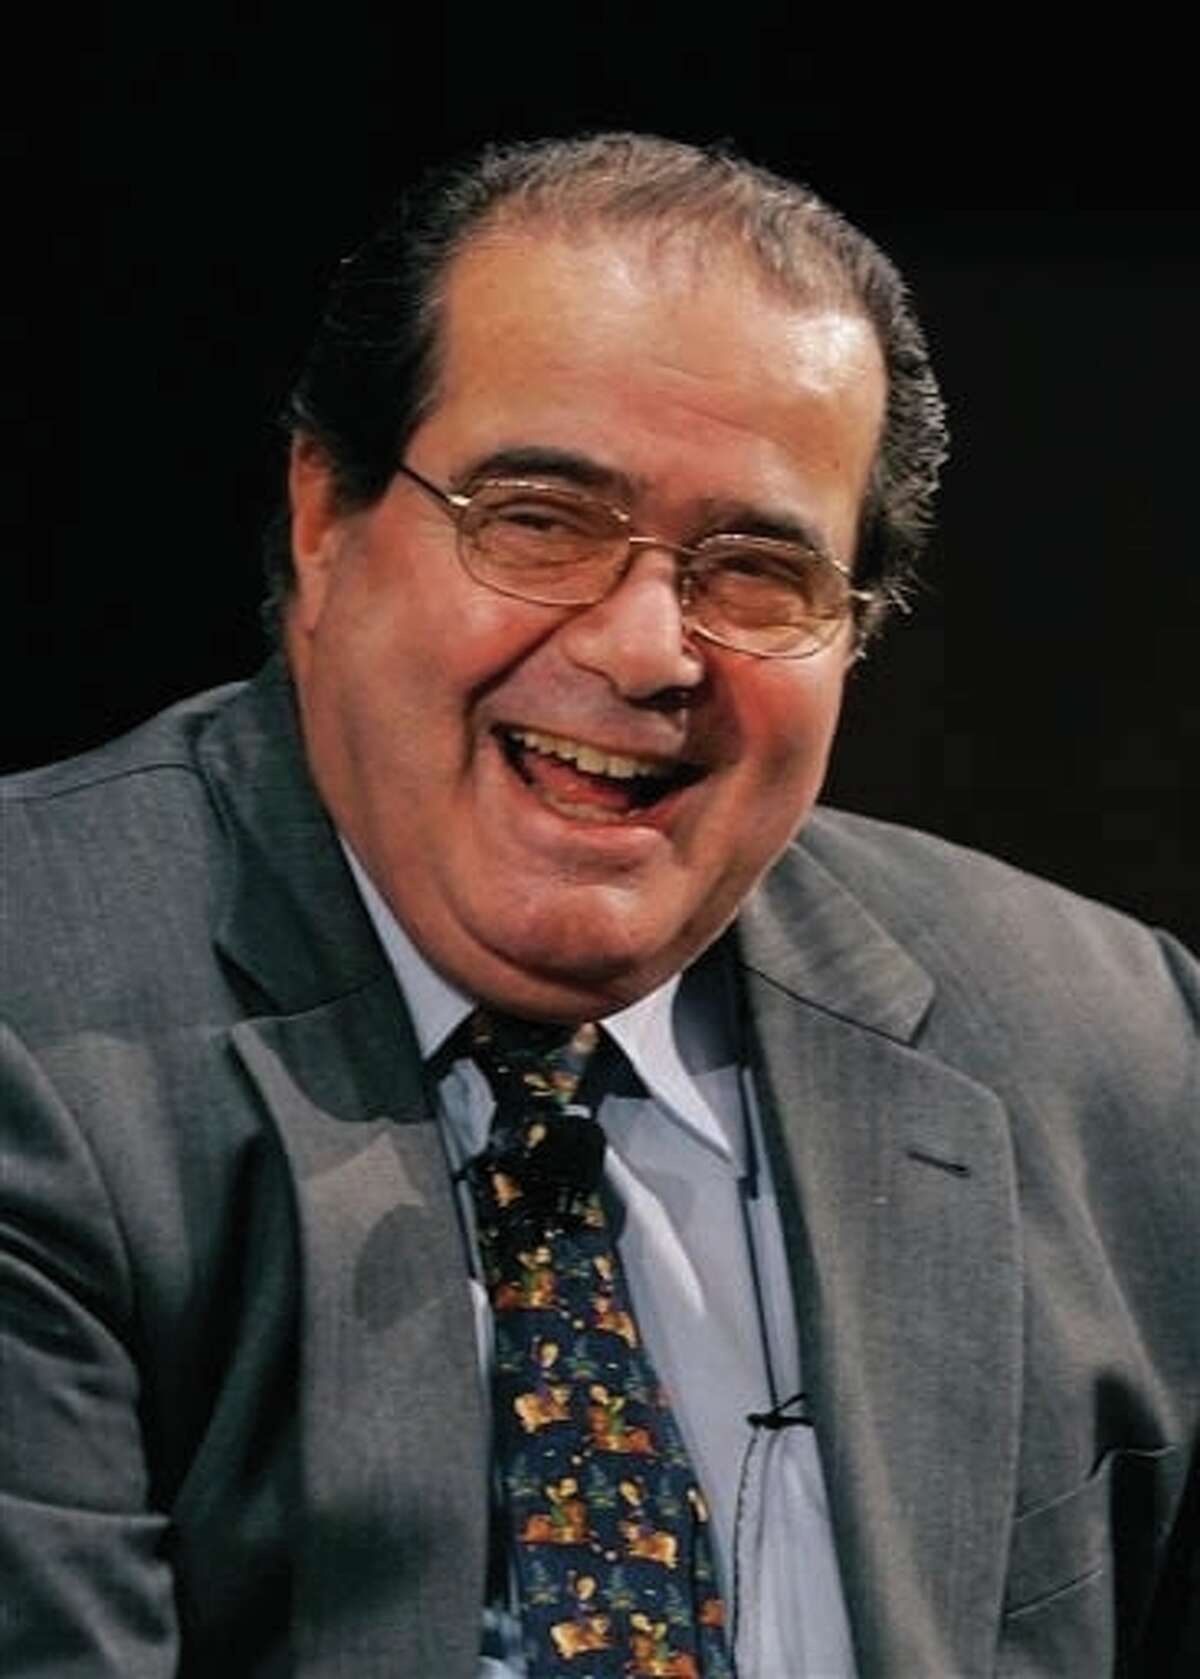 In this Wednesday, Jan. 10, 2007 file photo, Supreme Court Justice Antonin Scalia smiles during his introduction at the Intercontinental Hotel in Cleveland, as part of a Cleveland Clinic speakers series. On Saturday, Feb. 13, the U.S. Marshals Service confirmed that Scalia has died at the age of 79.